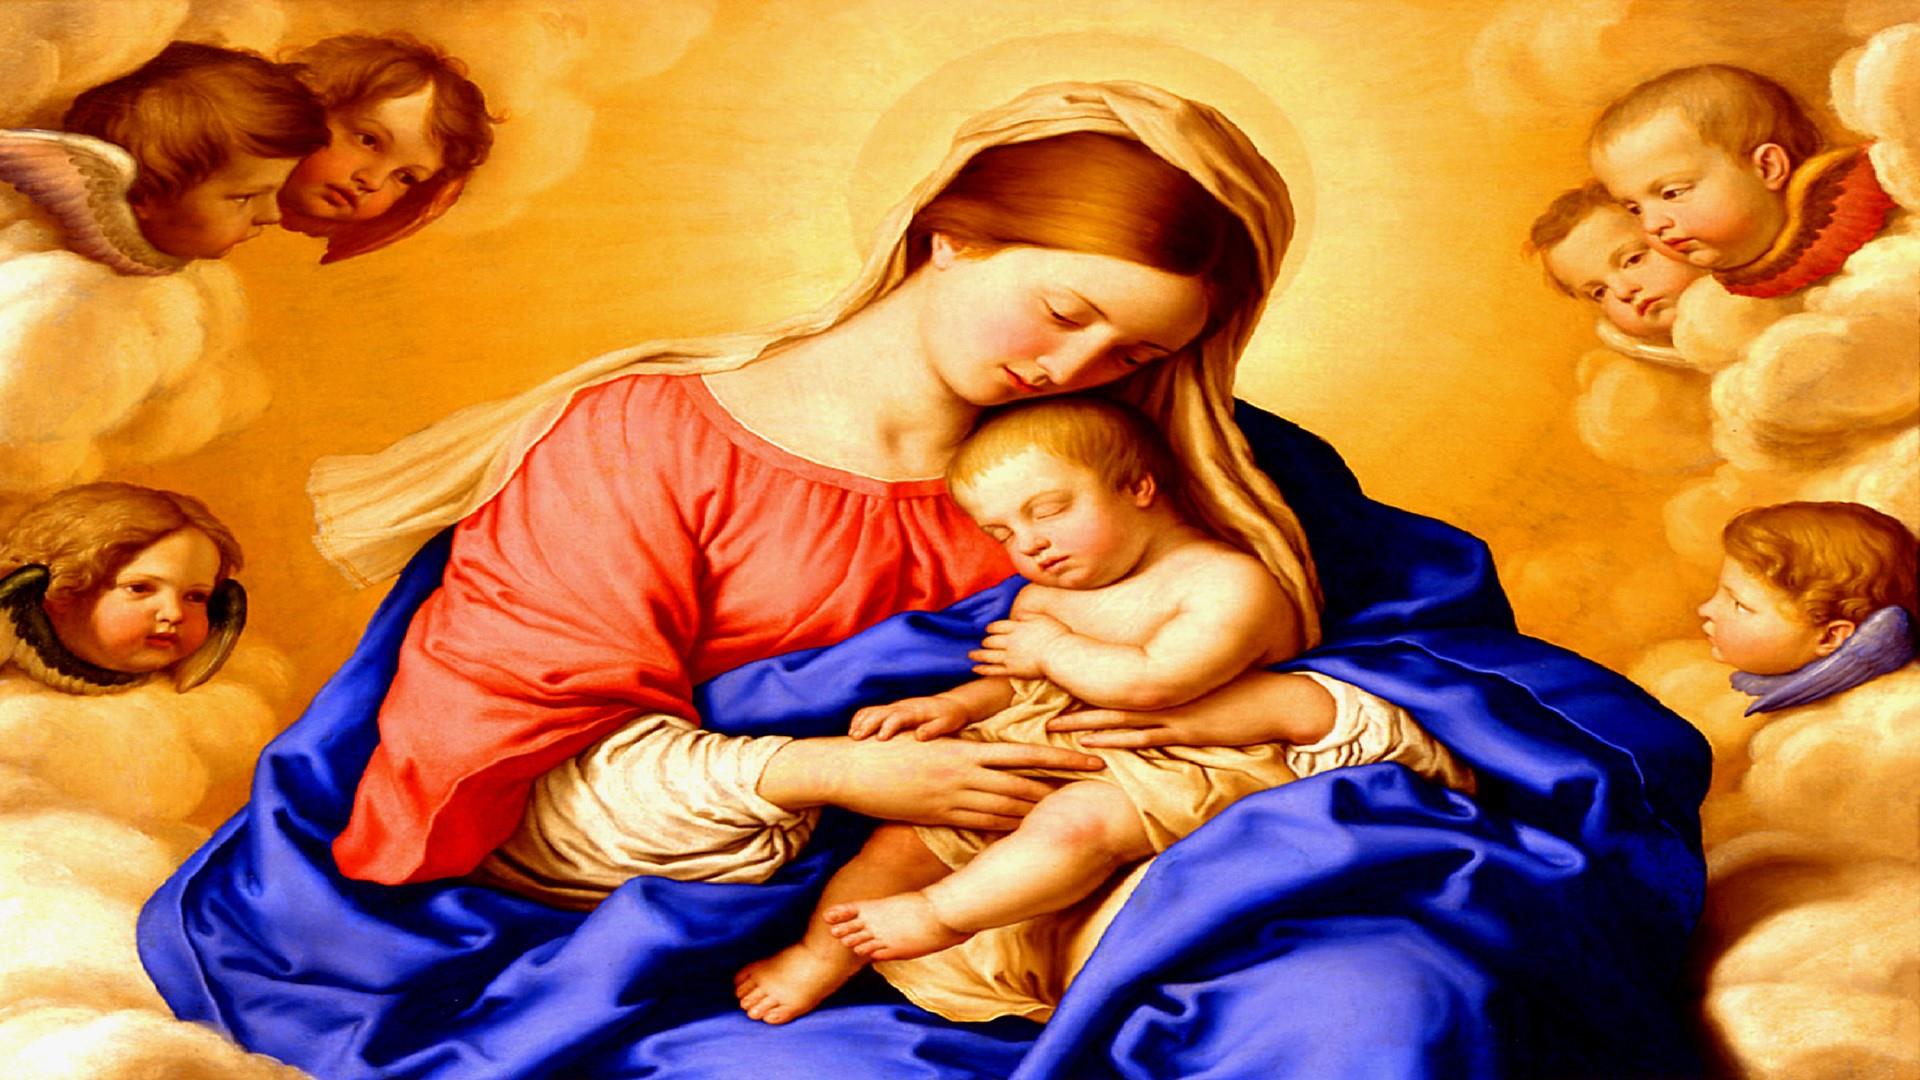 Beautiful Mother Mary Wallpapers